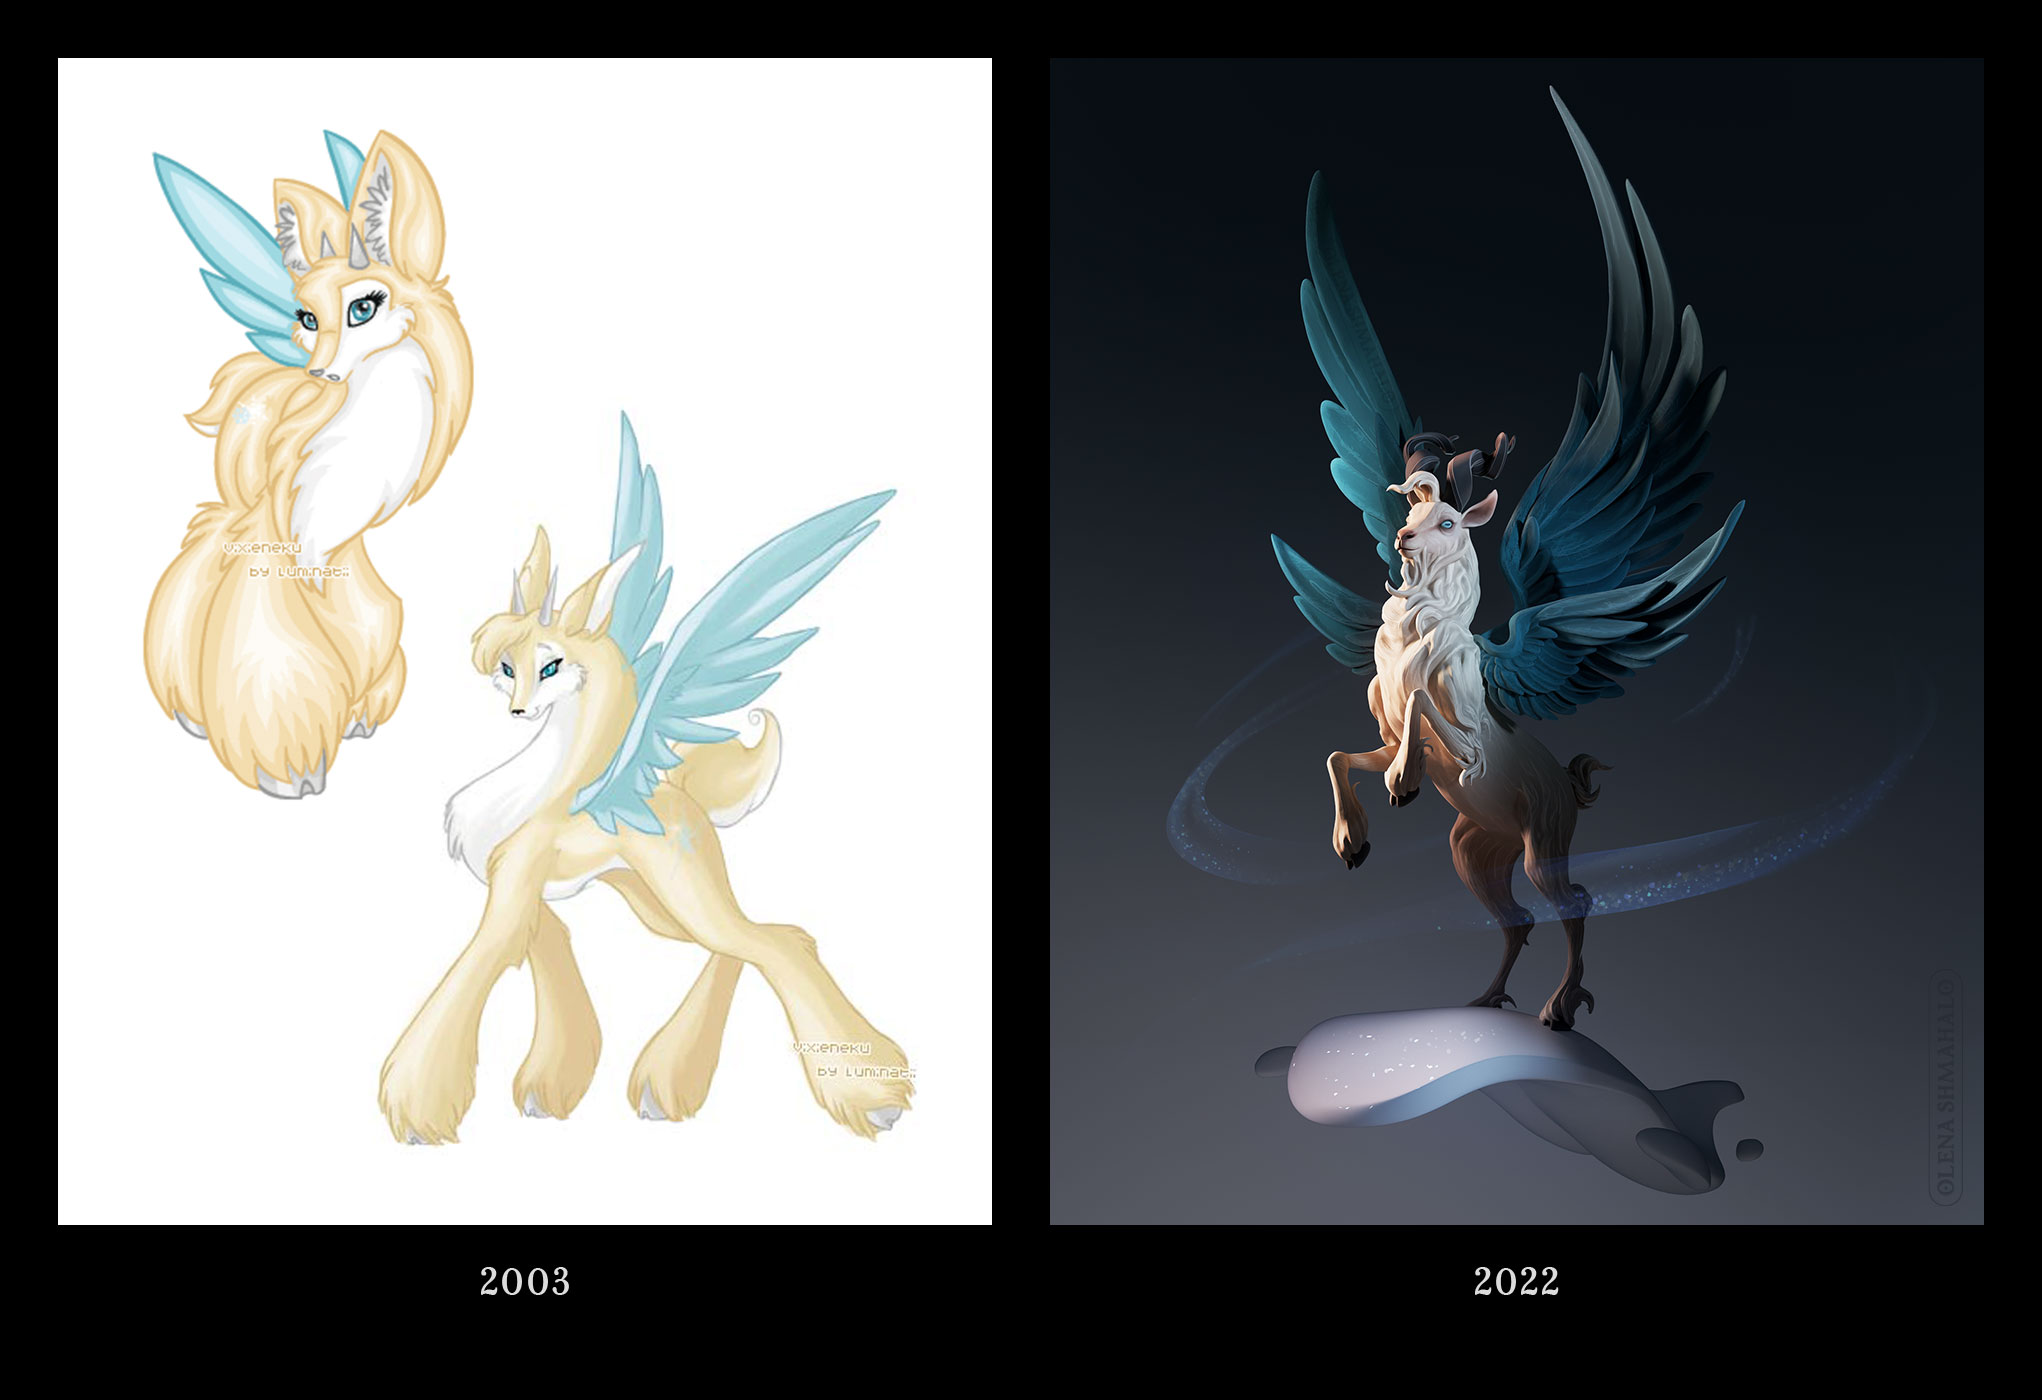 Stylized 3D sculpture of a beige goat-like creature with turquoise wings, next to old 2D drawings of the same character.